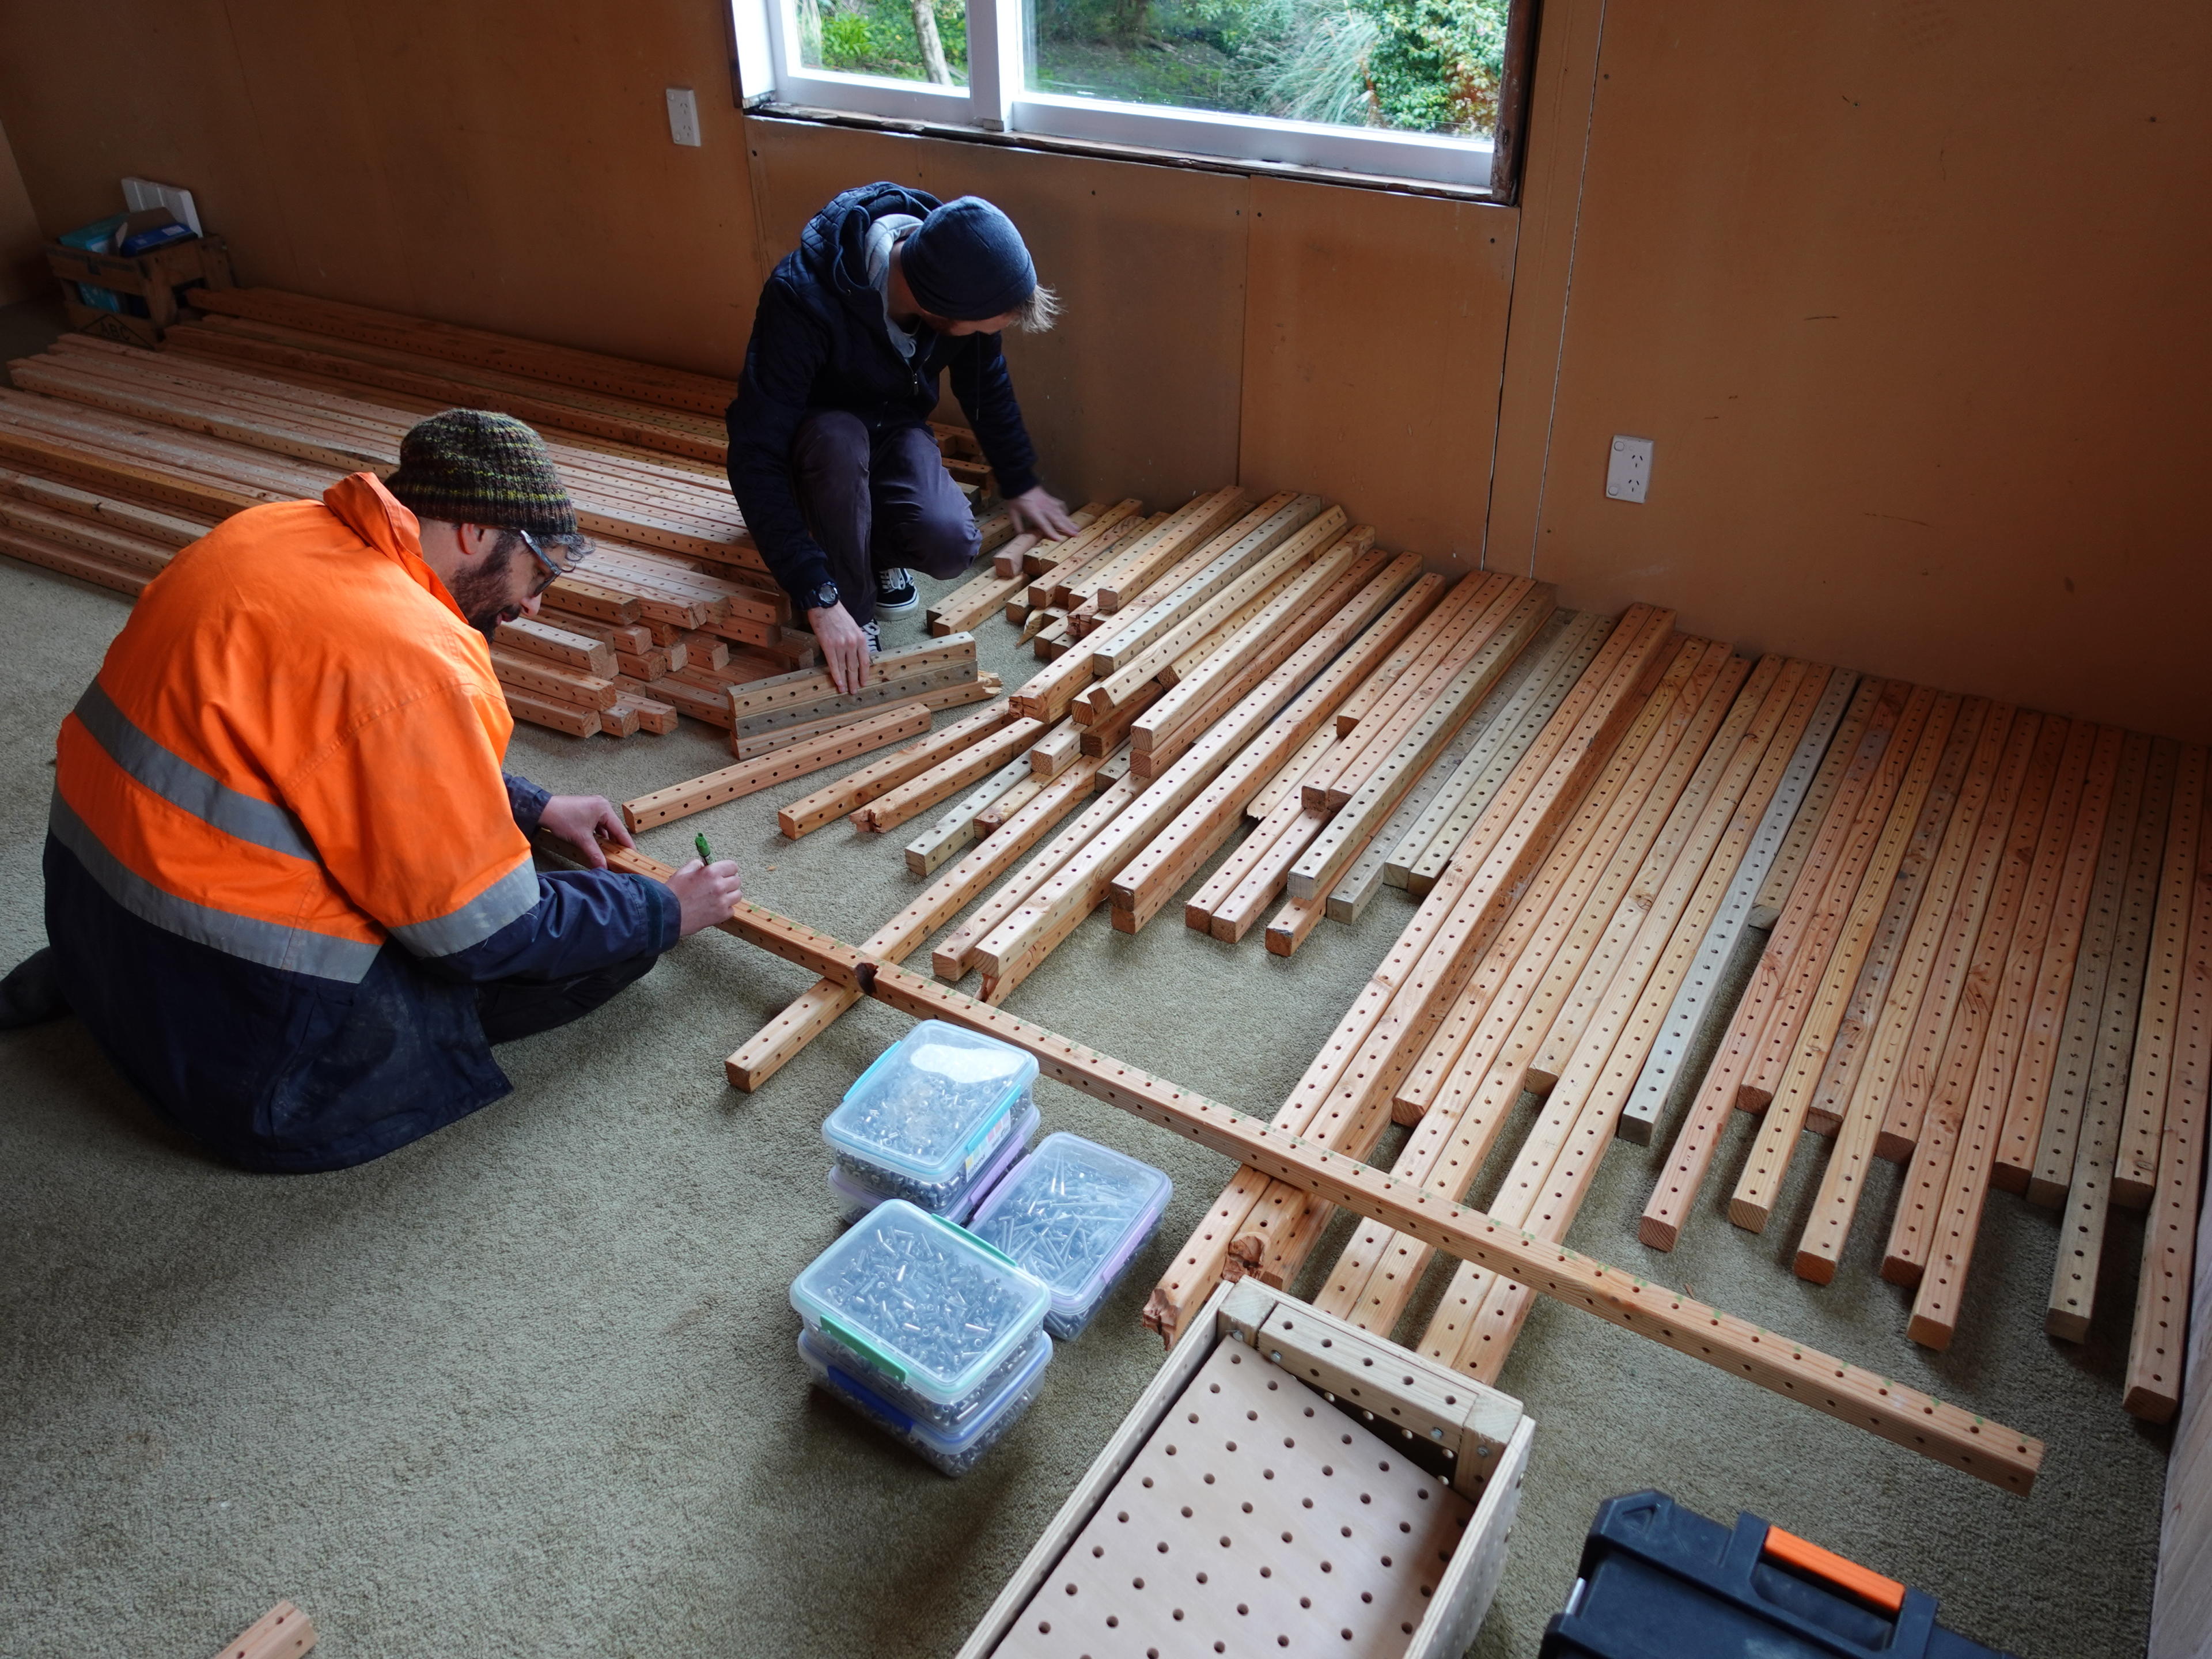 Counting and marking grid beams before cutting